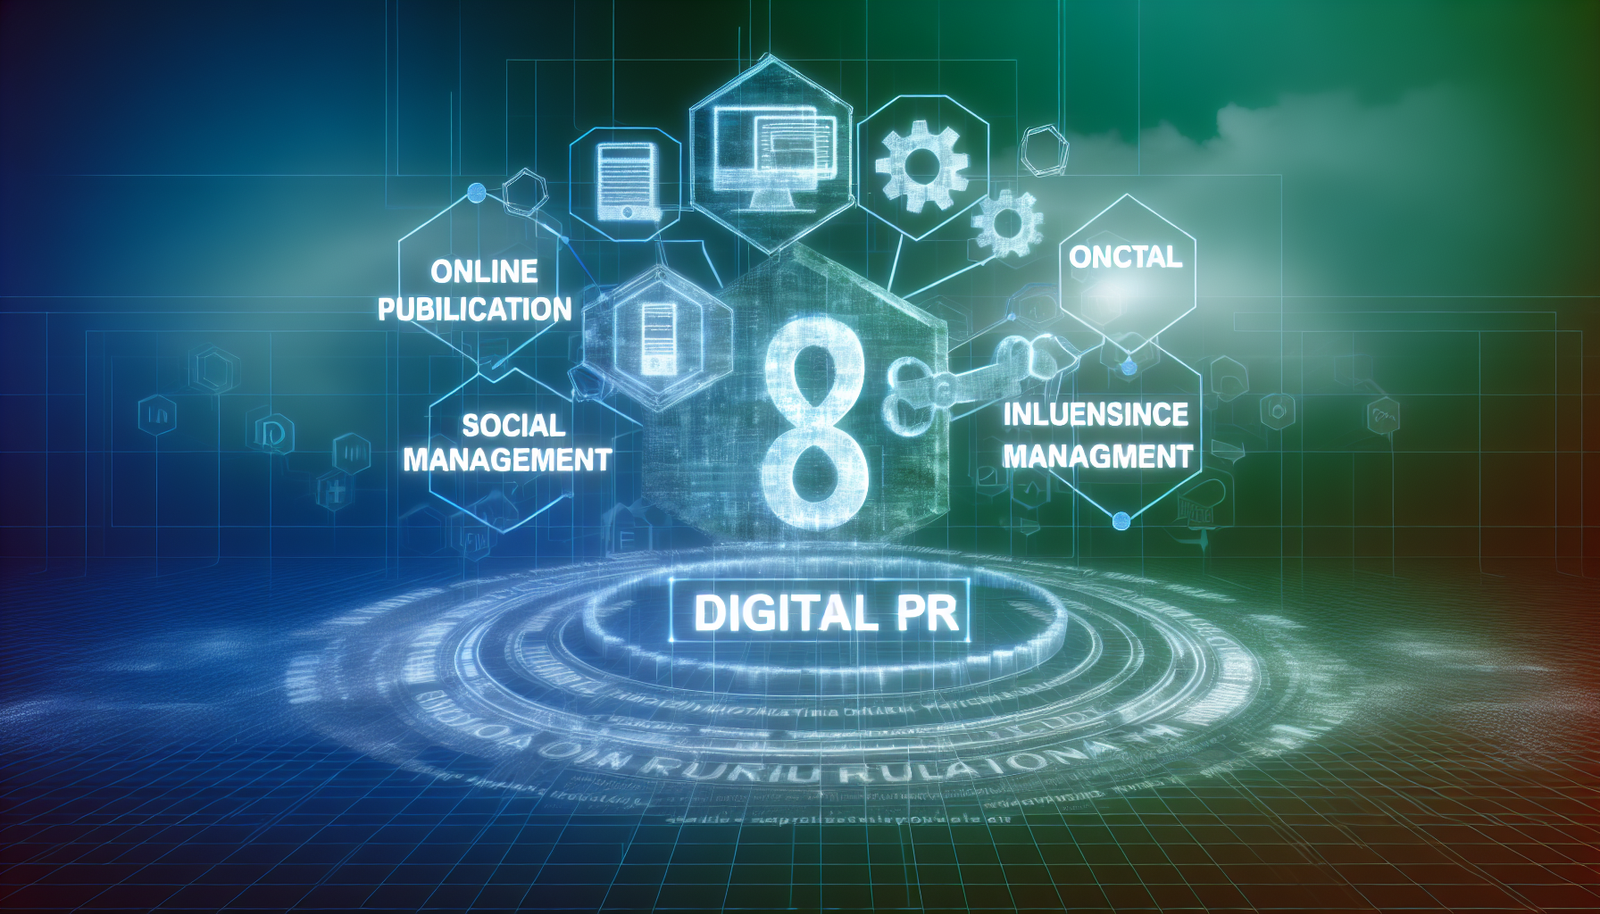 "The Ultimate Digital PR Guide: Why It Matters & How to Succeed"